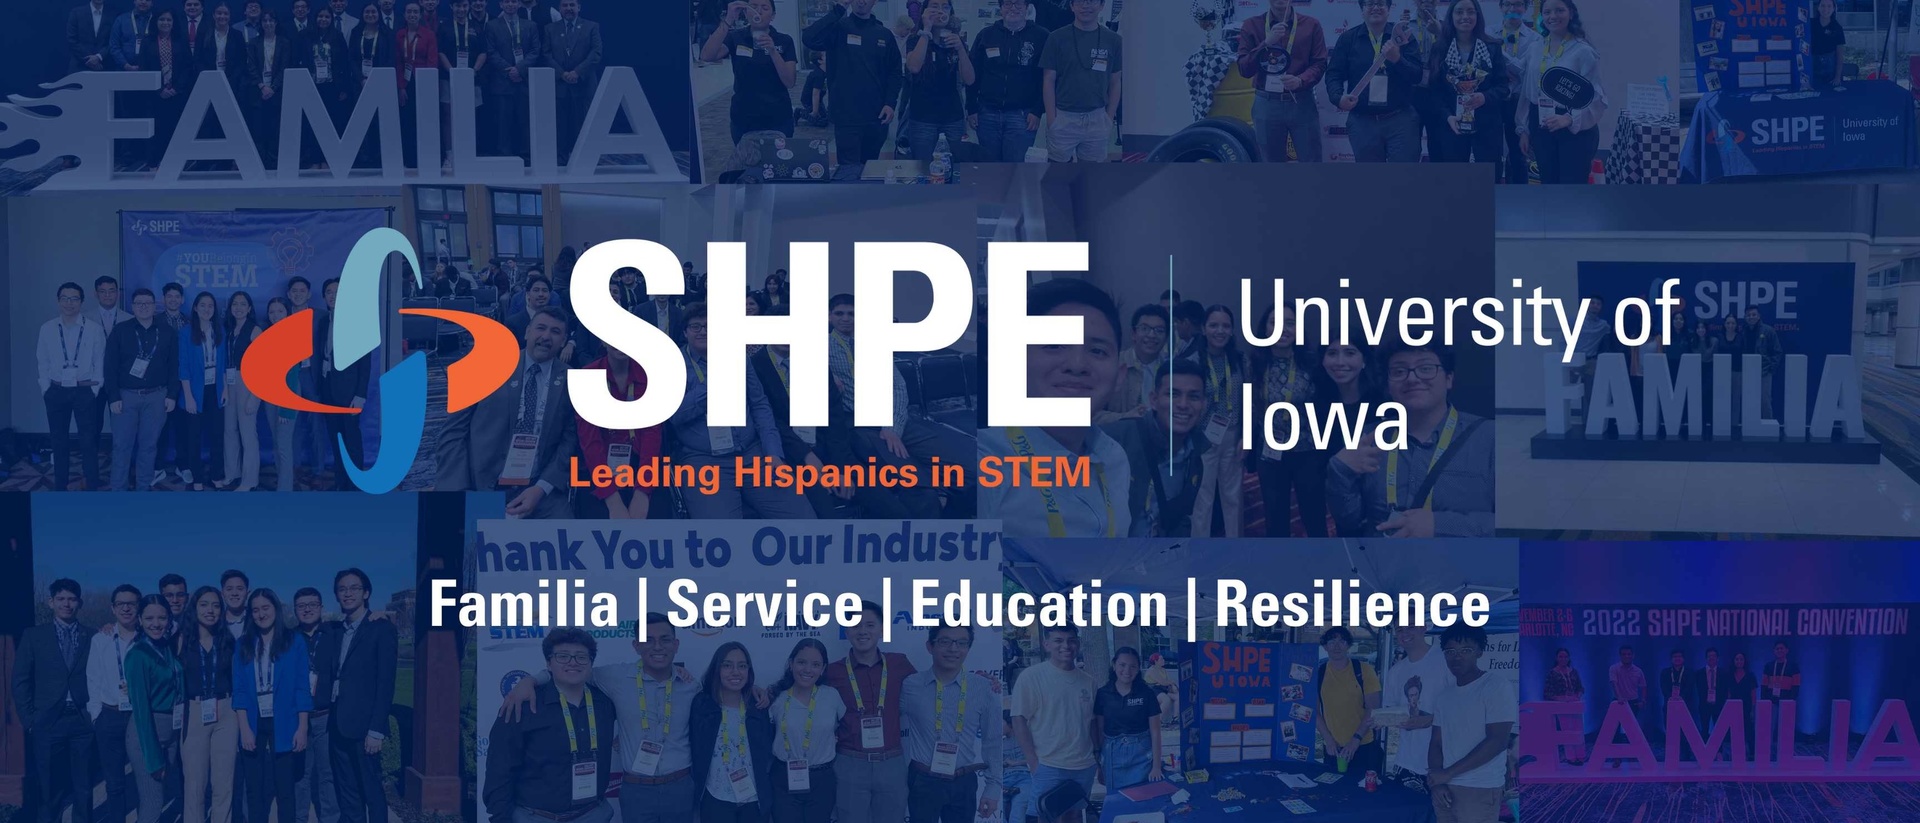 events-shpe-the-university-of-iowa